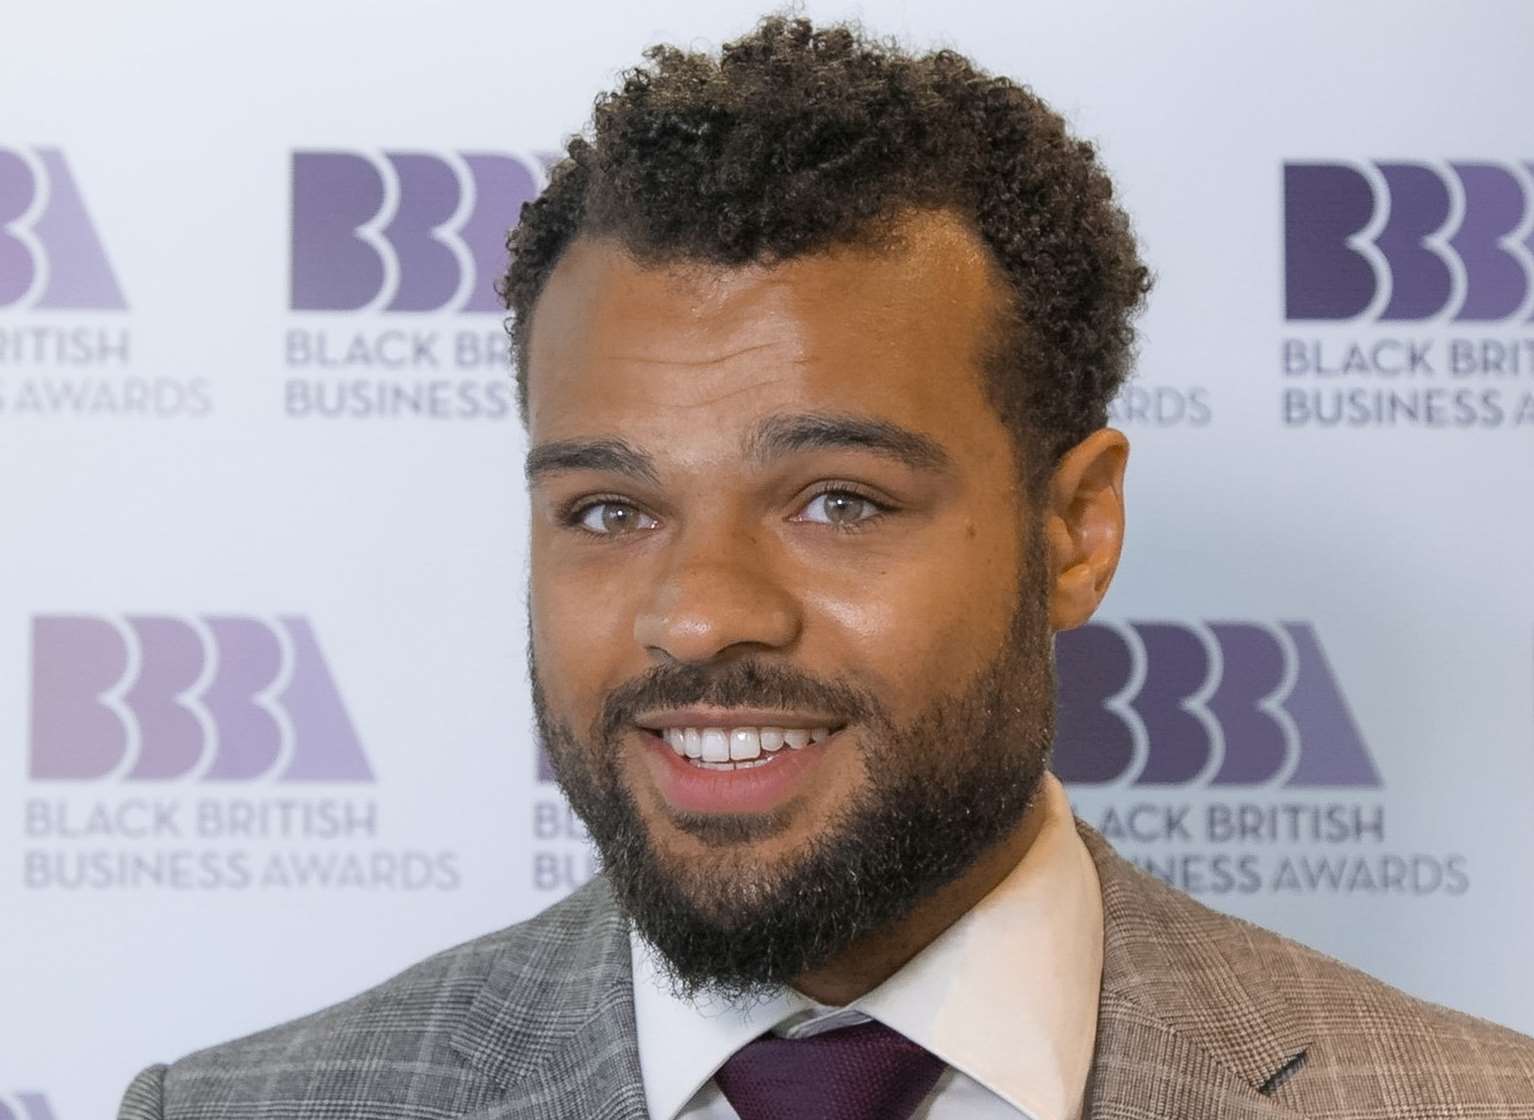 Elliot John Reid has been nominated as a rising star at the Black British Business Awards